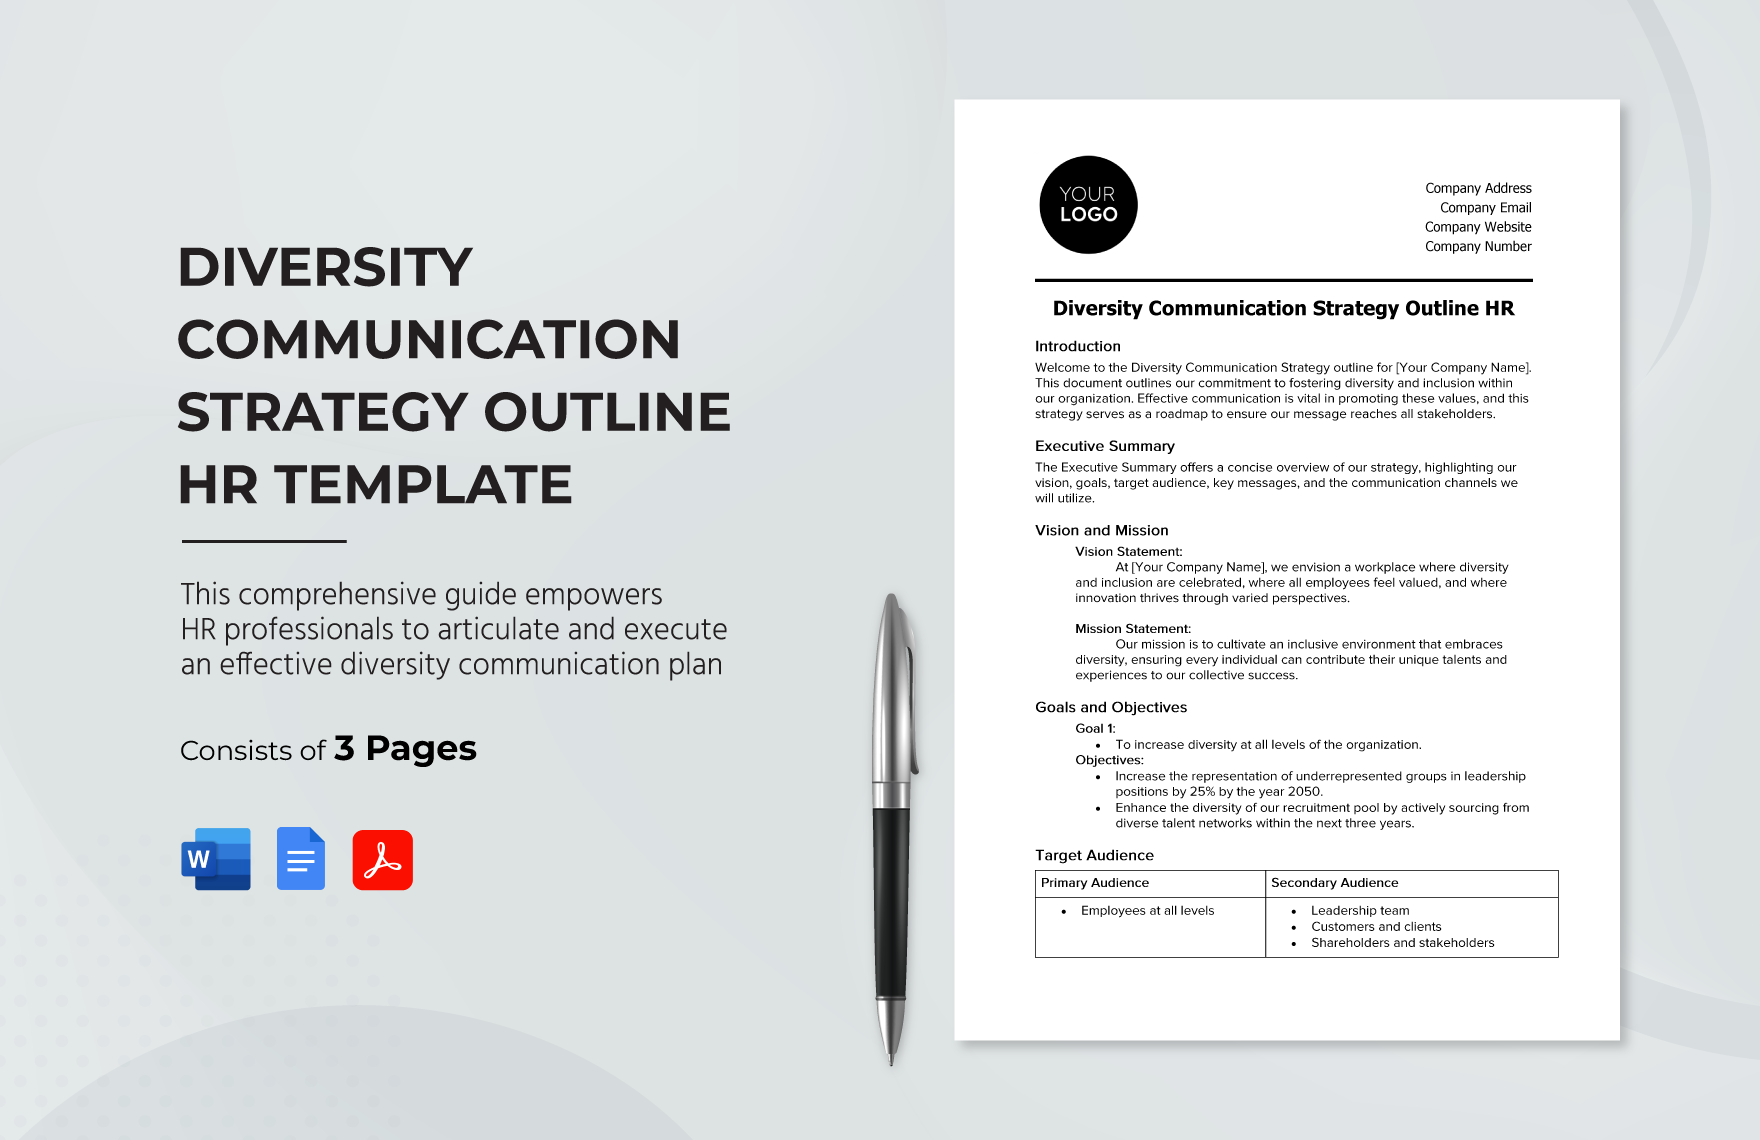 Diversity Communication Strategy Outline HR Template in Word, Google Docs, PDF